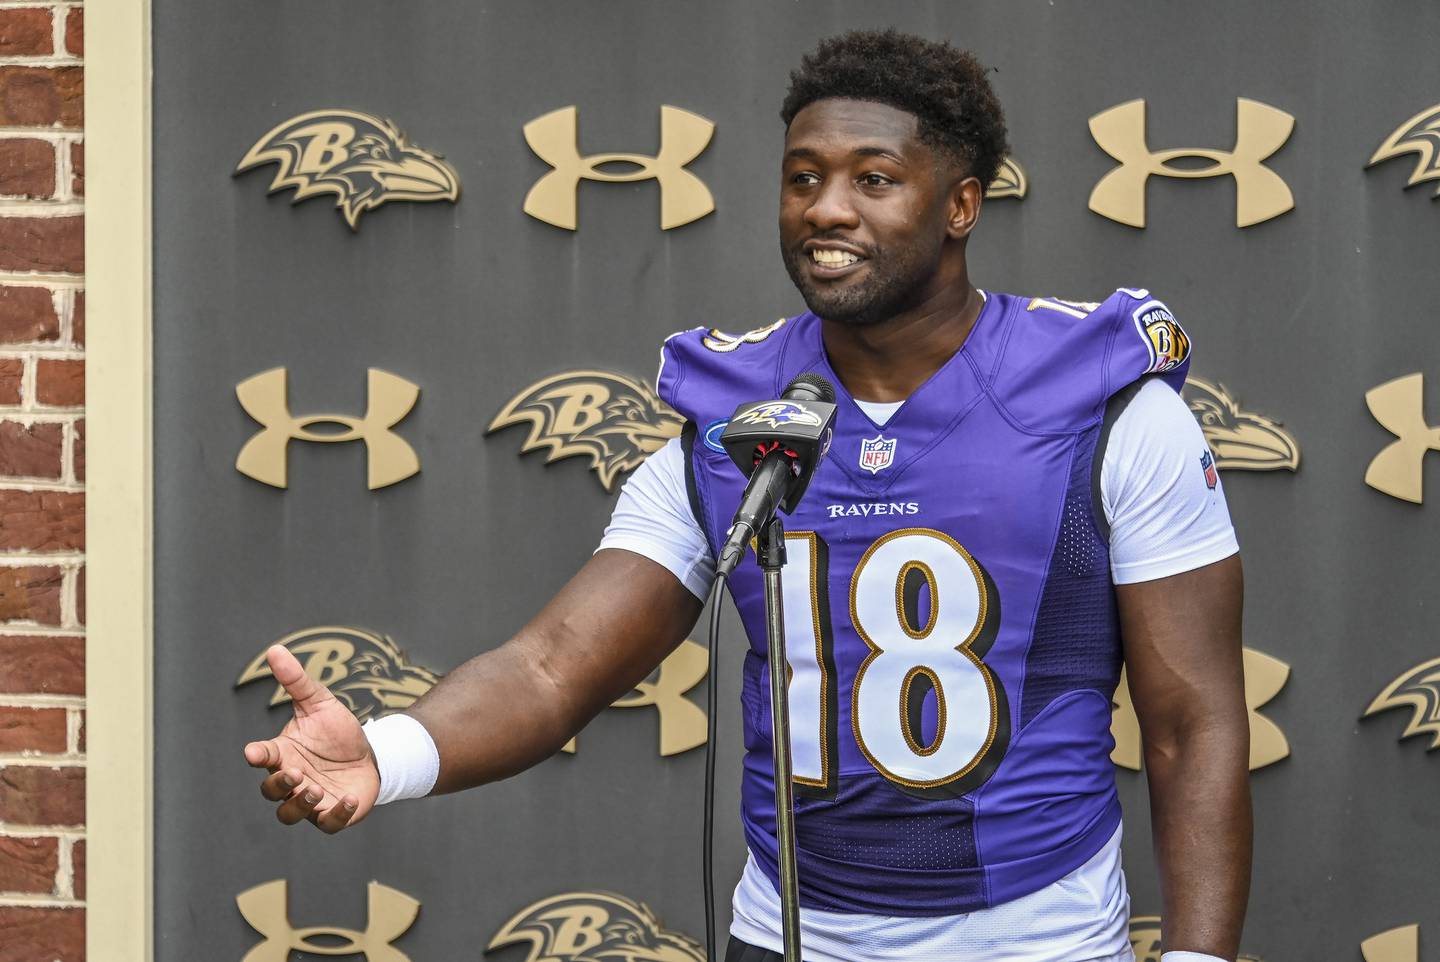 Ravens linebacker Roquan Smith said on Wednesday, “I have a great deal of respect for this organization [and] the way they handle things. I’m excited, and I know they’re trying to get over the hump and win the big game."